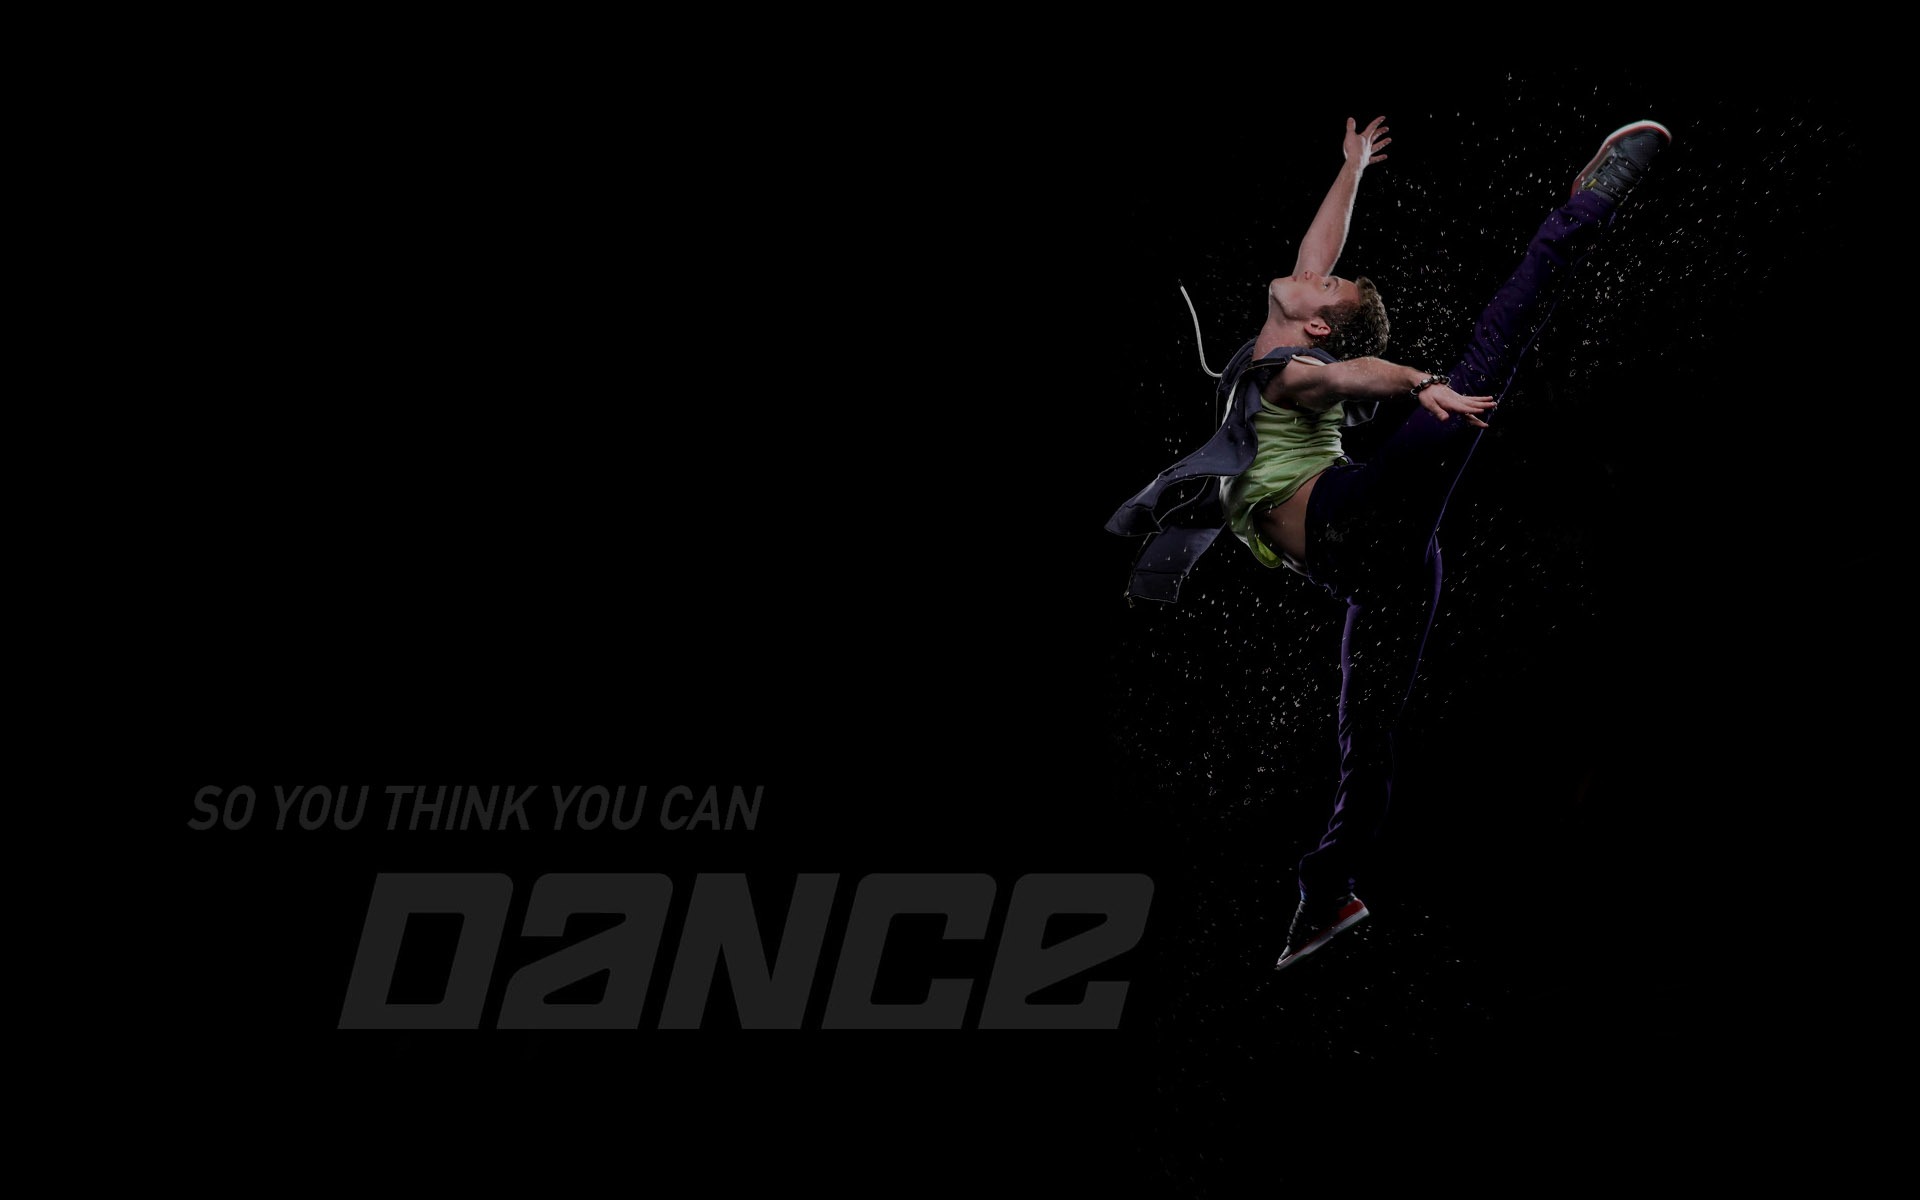 So You Think You Can Dance wallpaper (2) #8 - 1920x1200